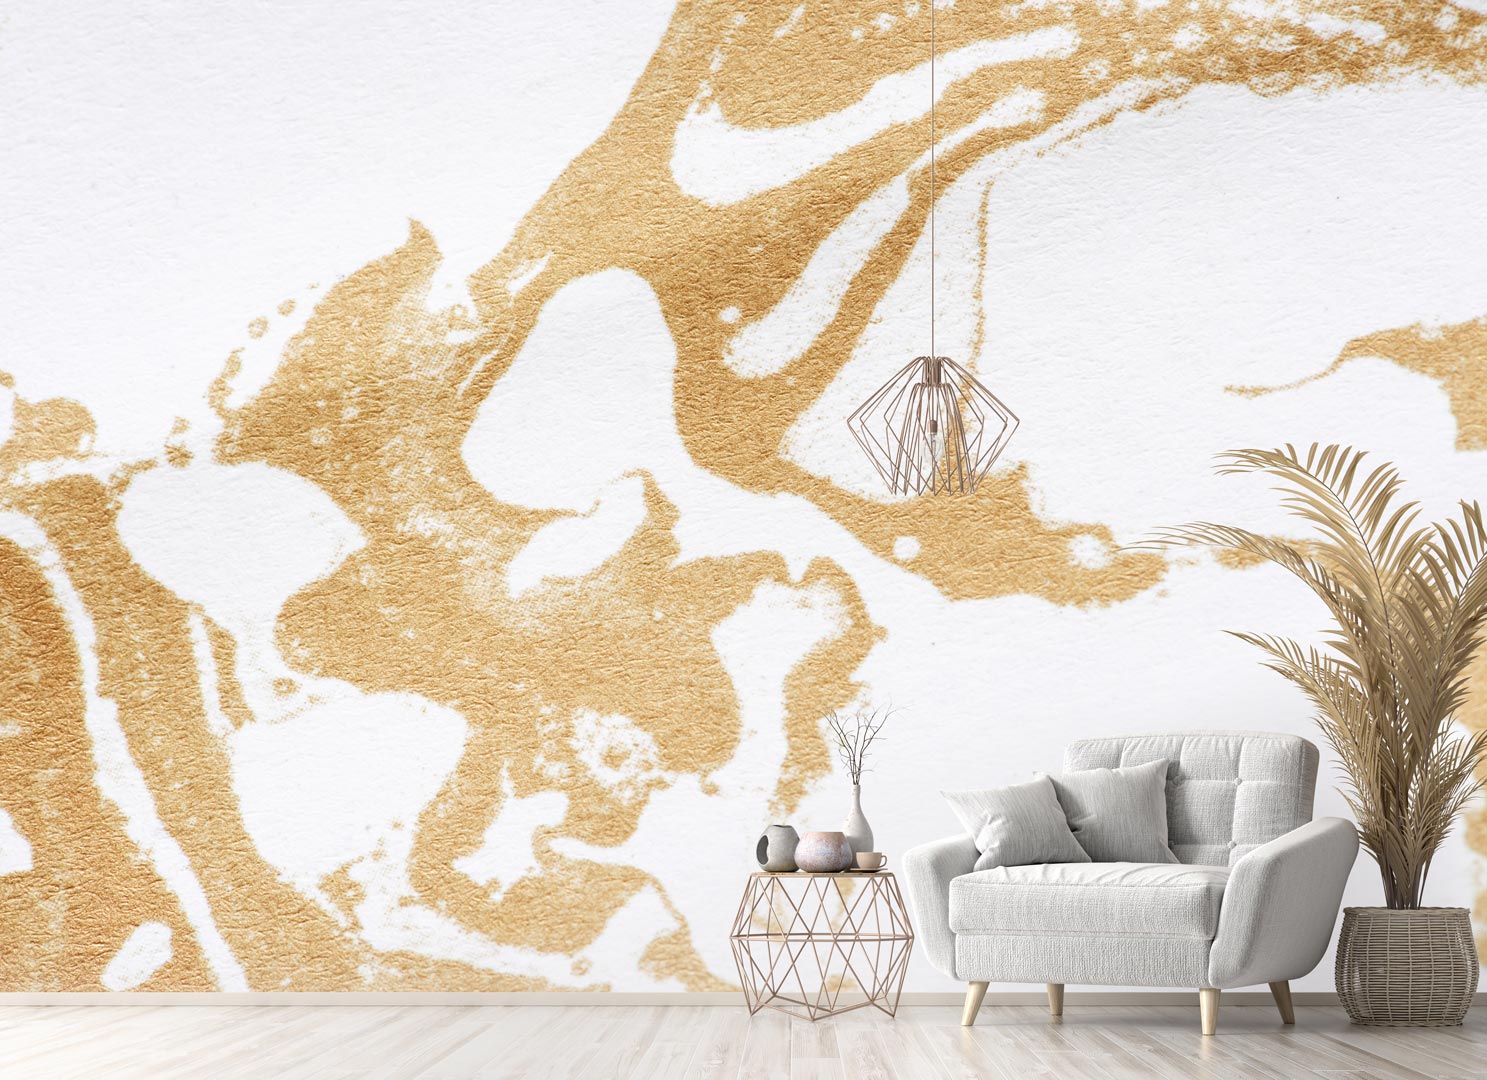 White and gold wallpaper, decorative pattern, glamour style, shades of beige - parched golden sand - Dekoori image 2